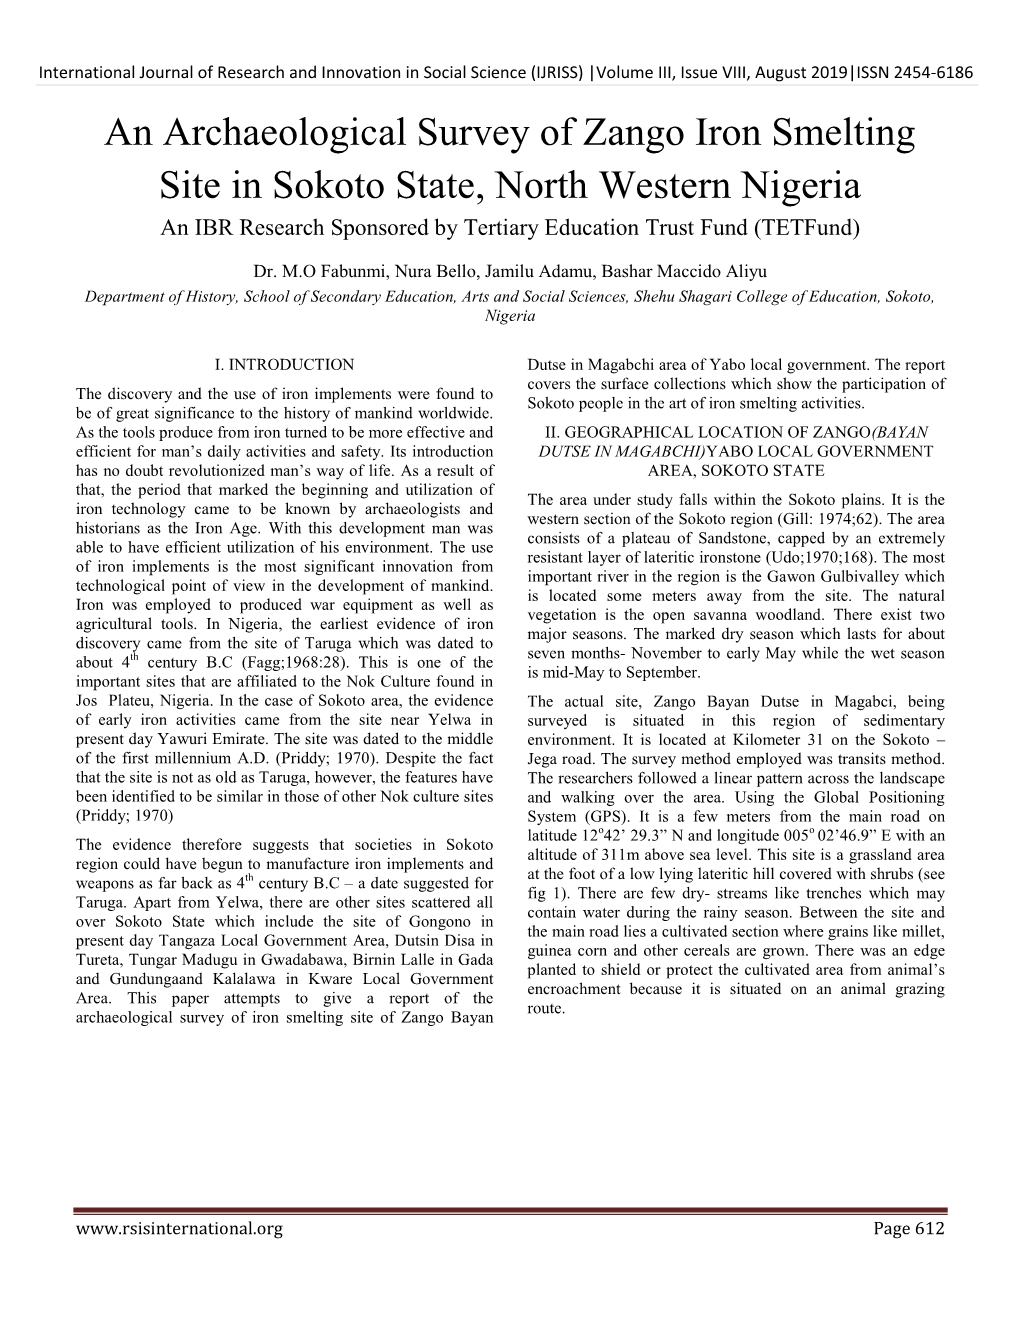 An Archaeological Survey of Zango Iron Smelting Site in Sokoto State, North Western Nigeria an IBR Research Sponsored by Tertiary Education Trust Fund (Tetfund)